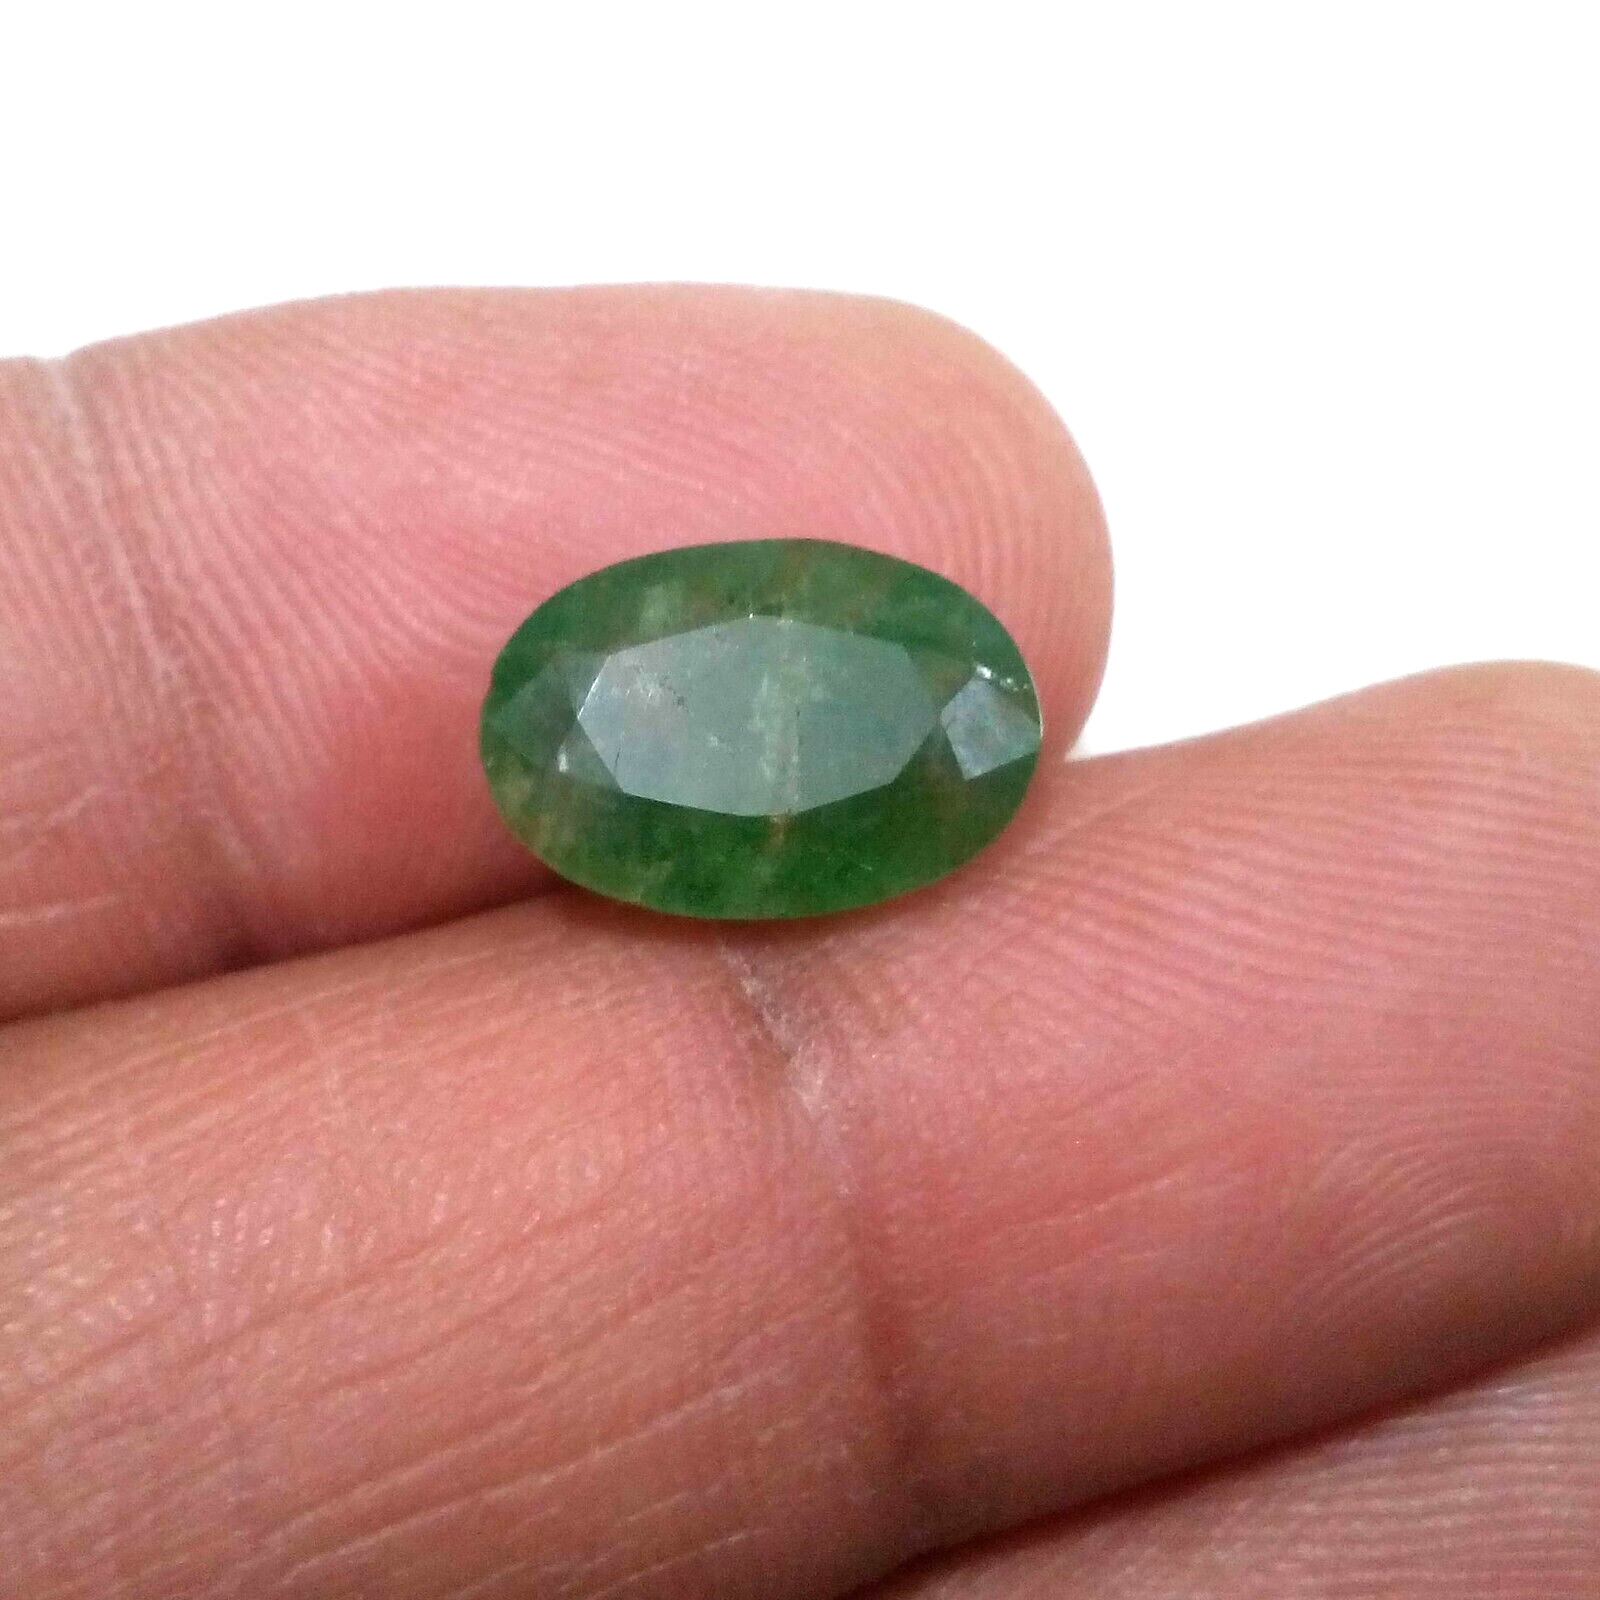 Gorgeous Zambian Emerald Oval Shape 4.75 Crt Rare Green Faceted Loose Gemstone